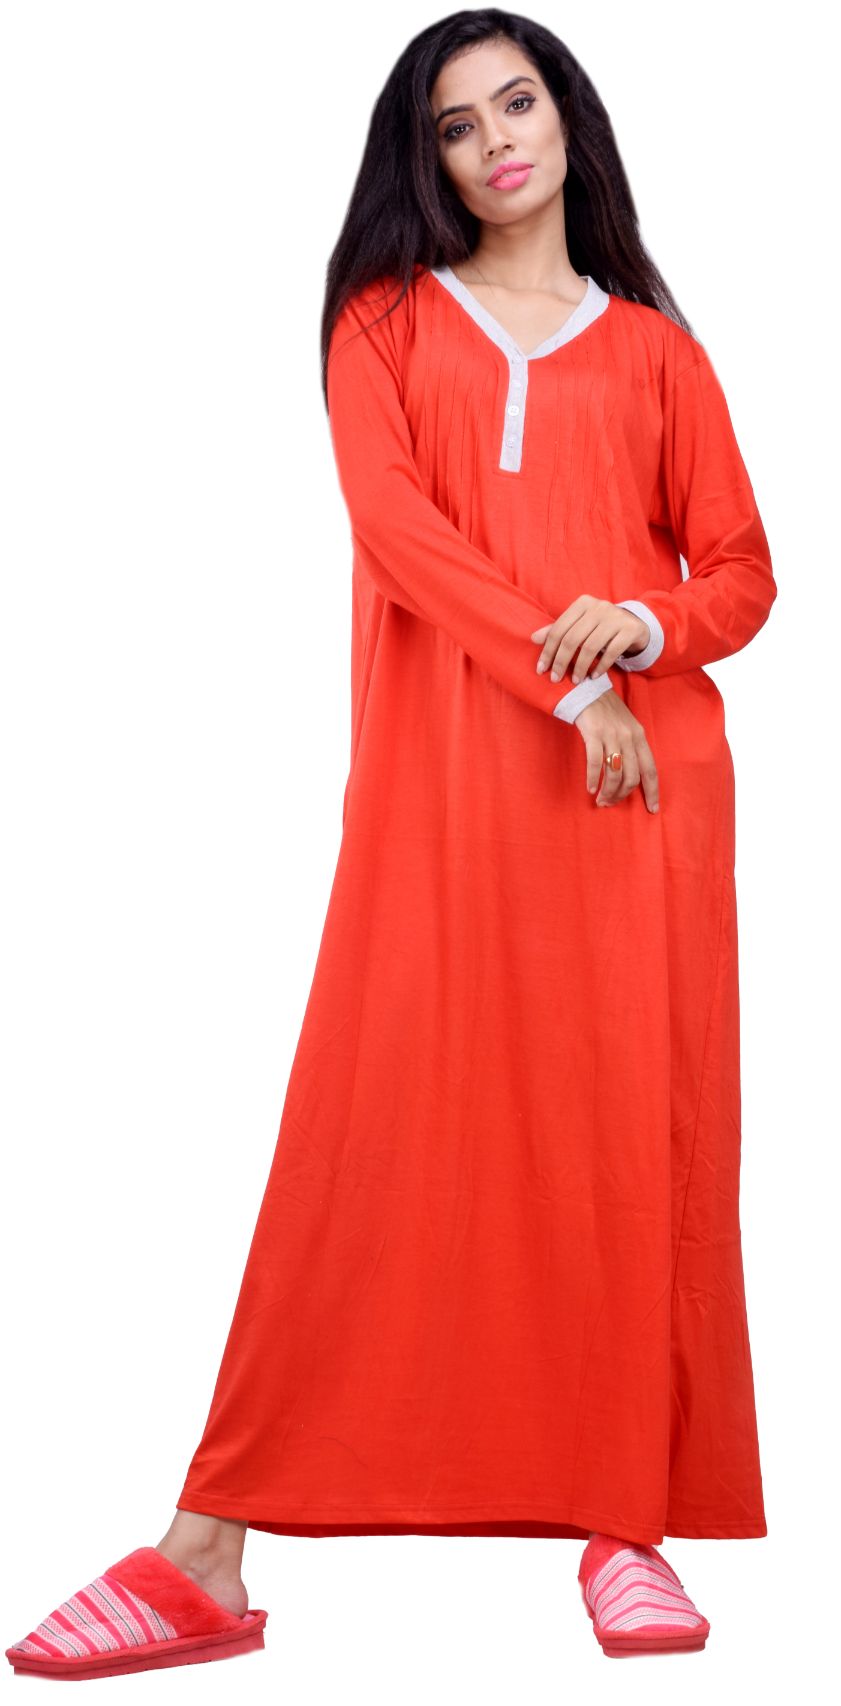 Floral Print Floral Chiffon Maxi Dress For Plus Size Women Chiffon, Full  Sleeve, Loose Fit, Perfect For Summer Concerts, Holidays, And Beach Days  From Fedoradie, $31.41 | DHgate.Com